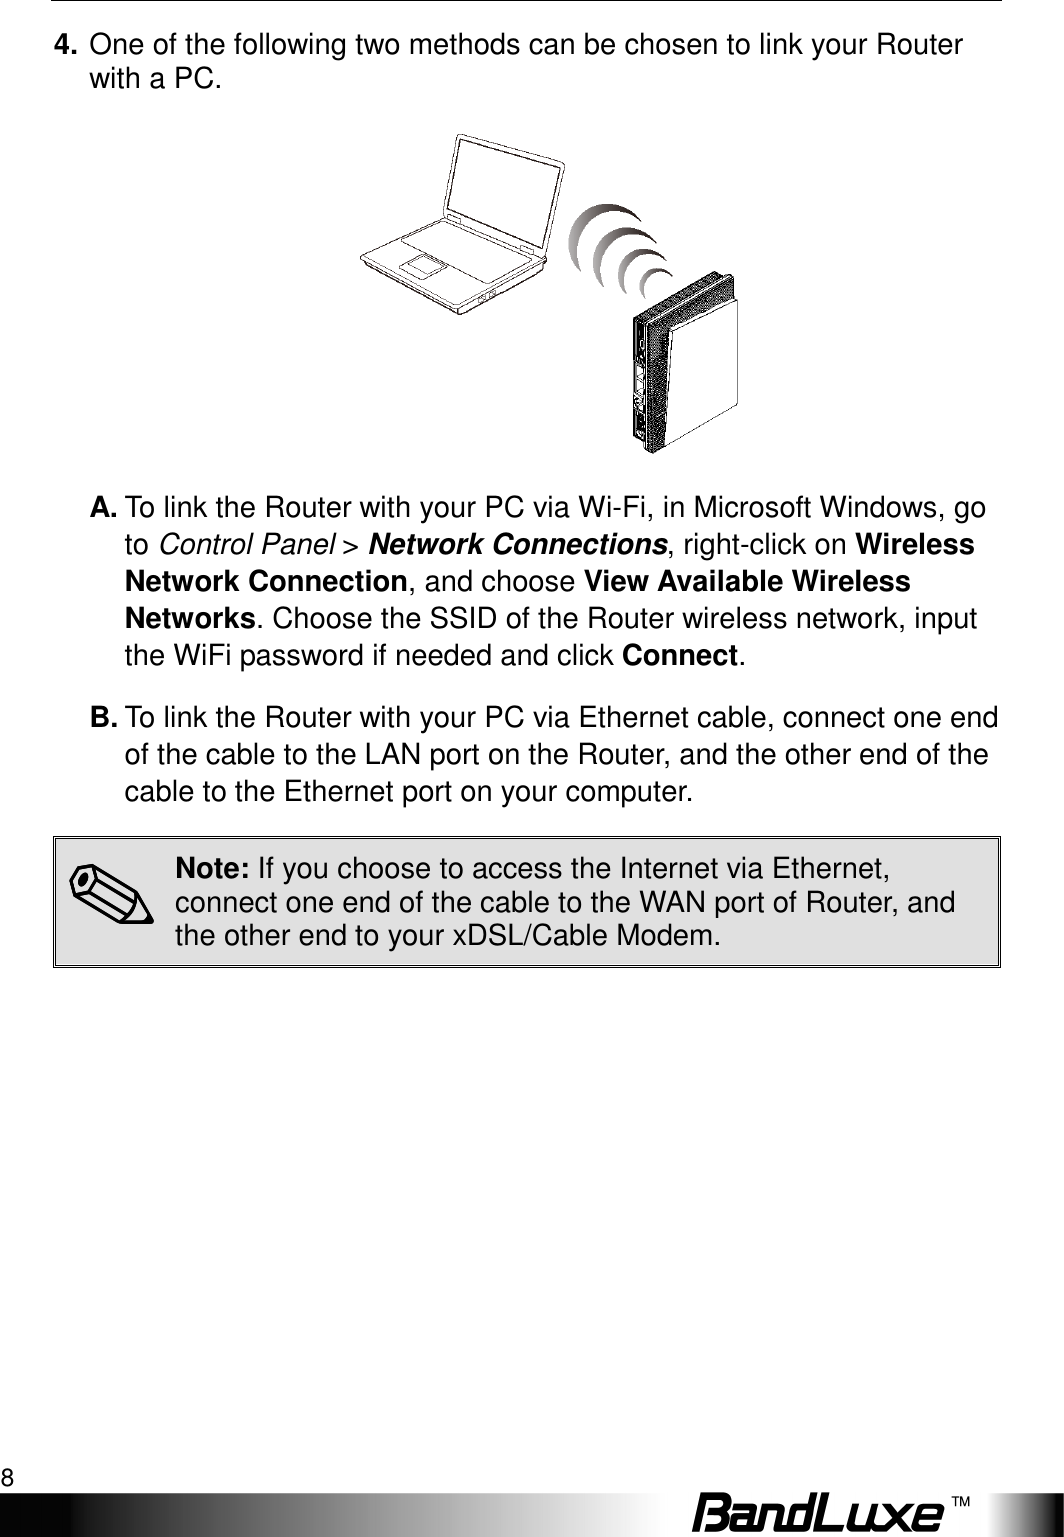 Installation 8  4. One of the following two methods can be chosen to link your Router with a PC.  A. To link the Router with your PC via Wi-Fi, in Microsoft Windows, go to Control Panel &gt; Network Connections, right-click on Wireless Network Connection, and choose View Available Wireless Networks. Choose the SSID of the Router wireless network, input the WiFi password if needed and click Connect.   B. To link the Router with your PC via Ethernet cable, connect one end of the cable to the LAN port on the Router, and the other end of the cable to the Ethernet port on your computer. ✎✎✎✎ Note: If you choose to access the Internet via Ethernet, connect one end of the cable to the WAN port of Router, and the other end to your xDSL/Cable Modem. 